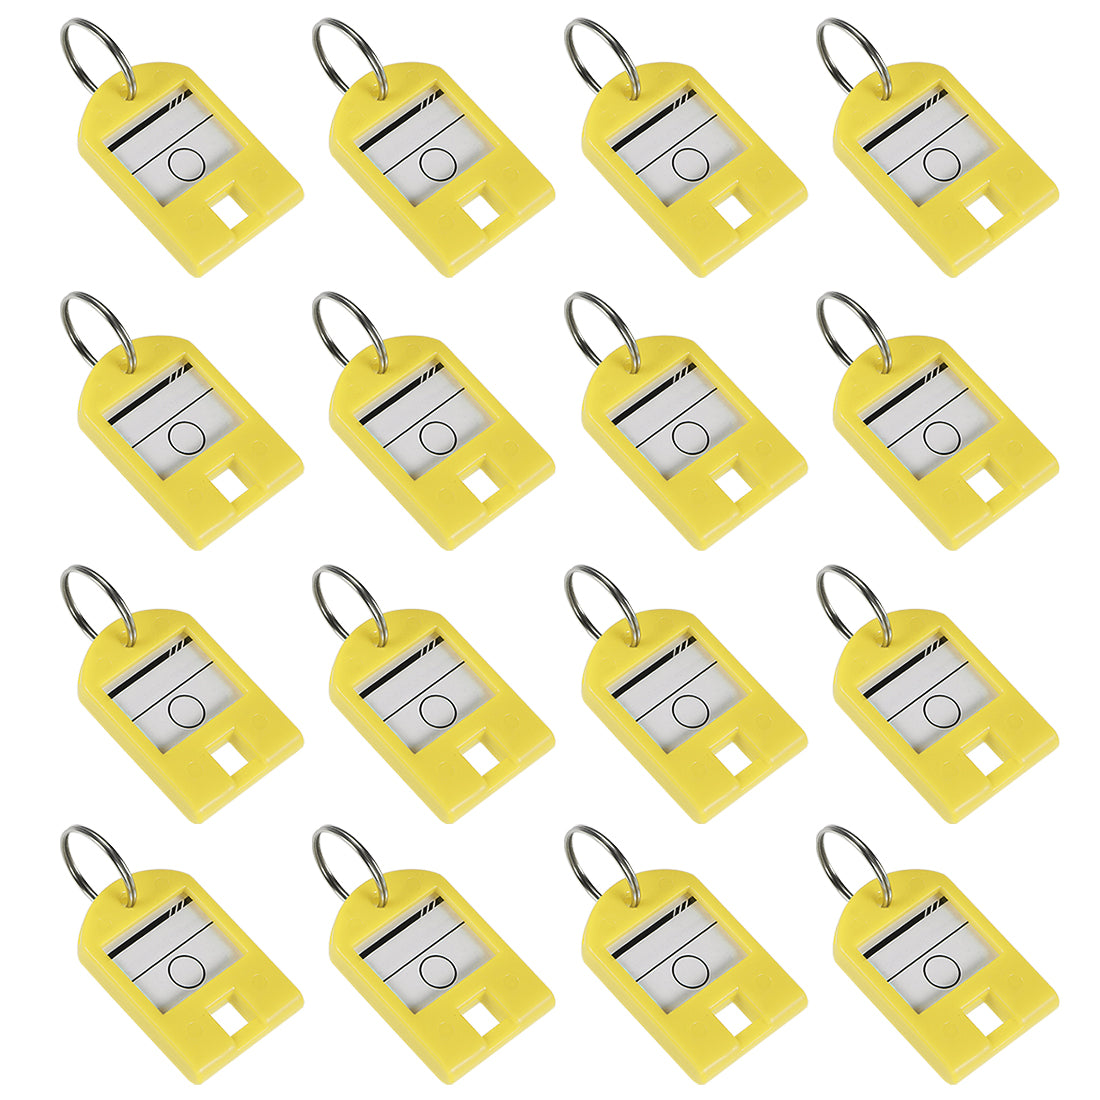 uxcell Uxcell 16 piece Plastic Key Tags with Split Ring Keychain ID Luggage Label Window